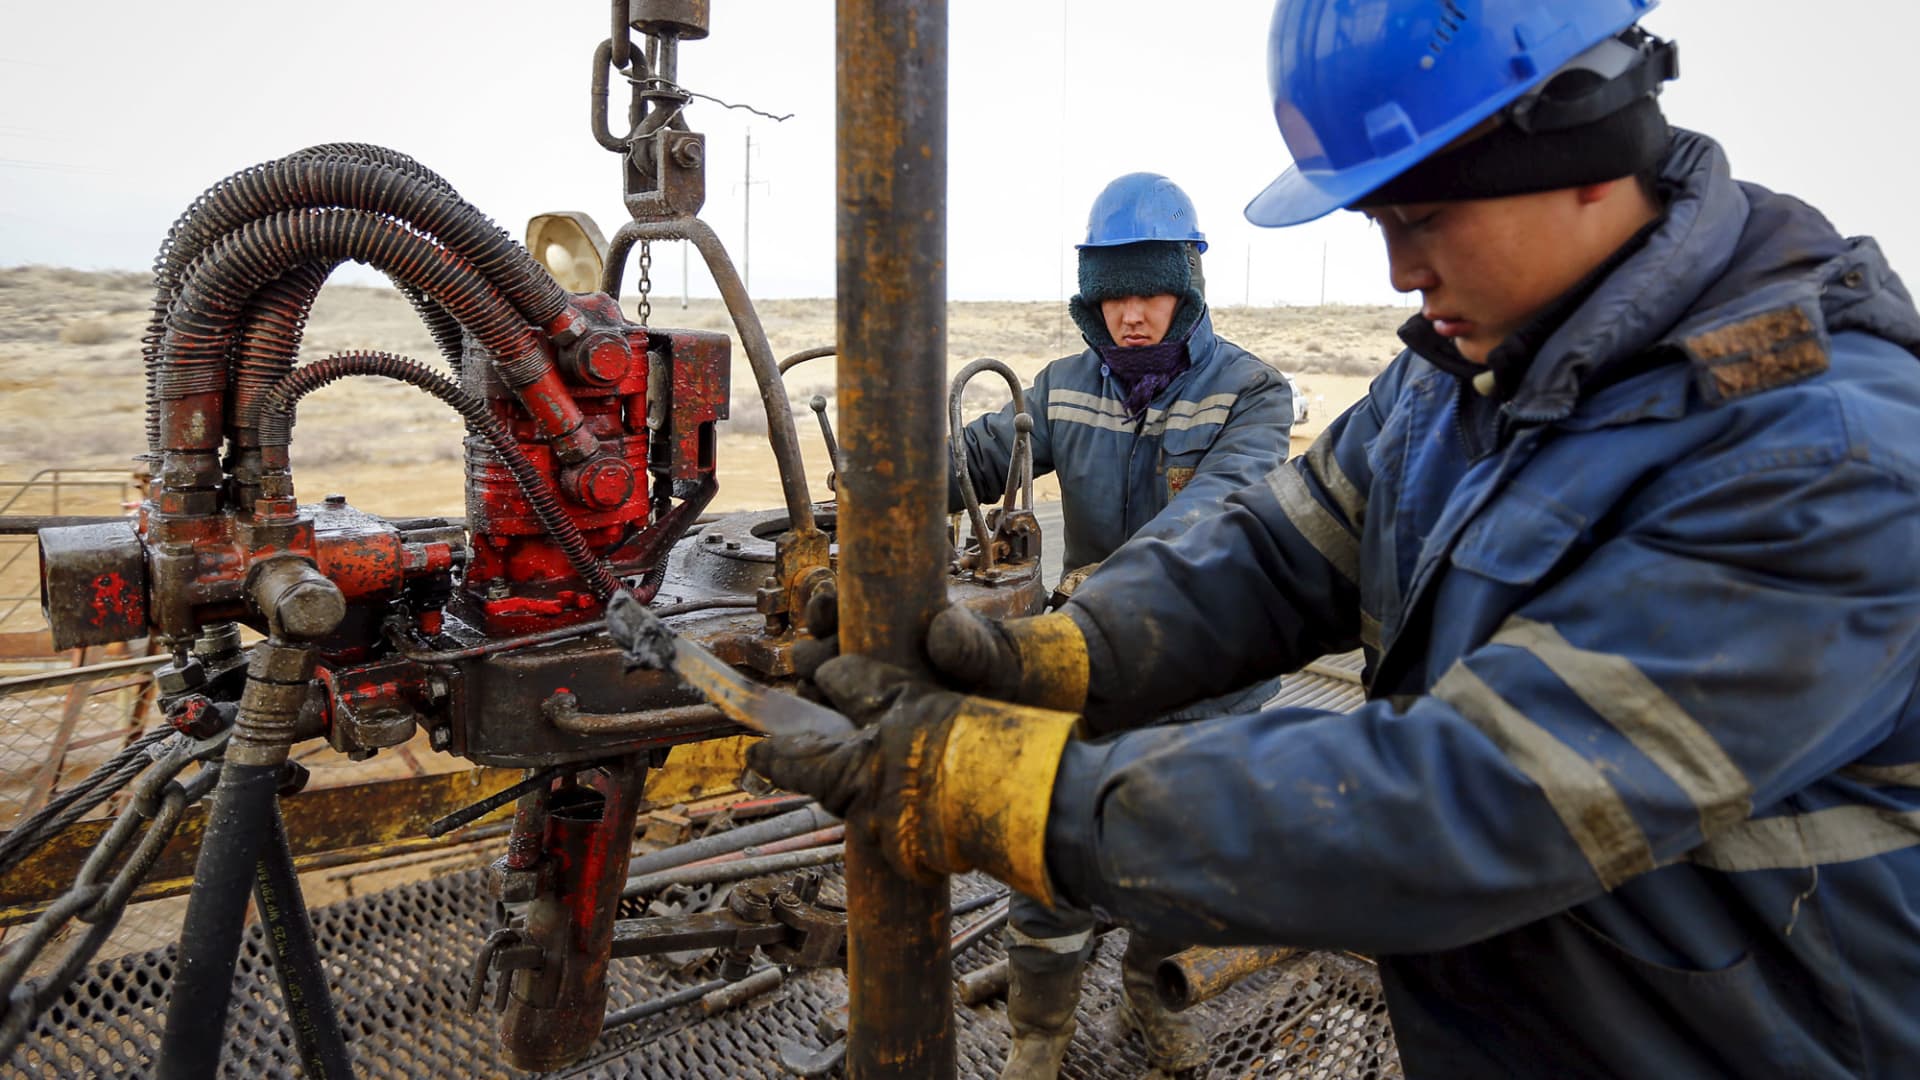 Workers at an oil well operated by a subsidiary of the KazMunayGas Exploration Production JSC in Kazakhstan, January 21, 2016.